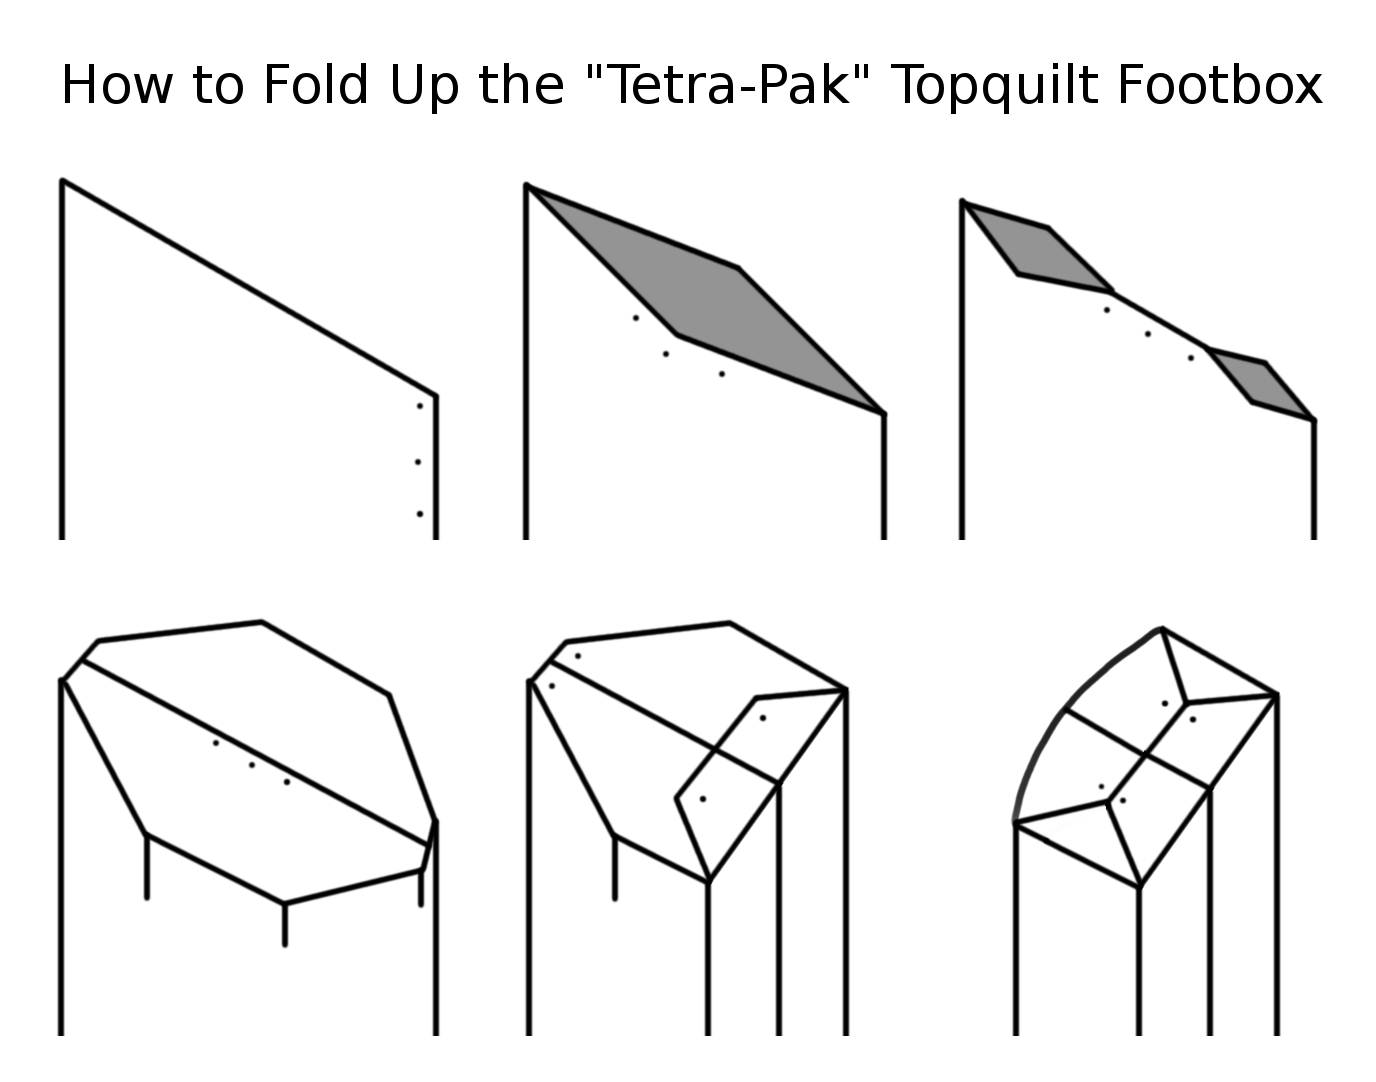 The footbox on the GEMINI version 2.0 topquilt folds up like a Tetra-Pak box.